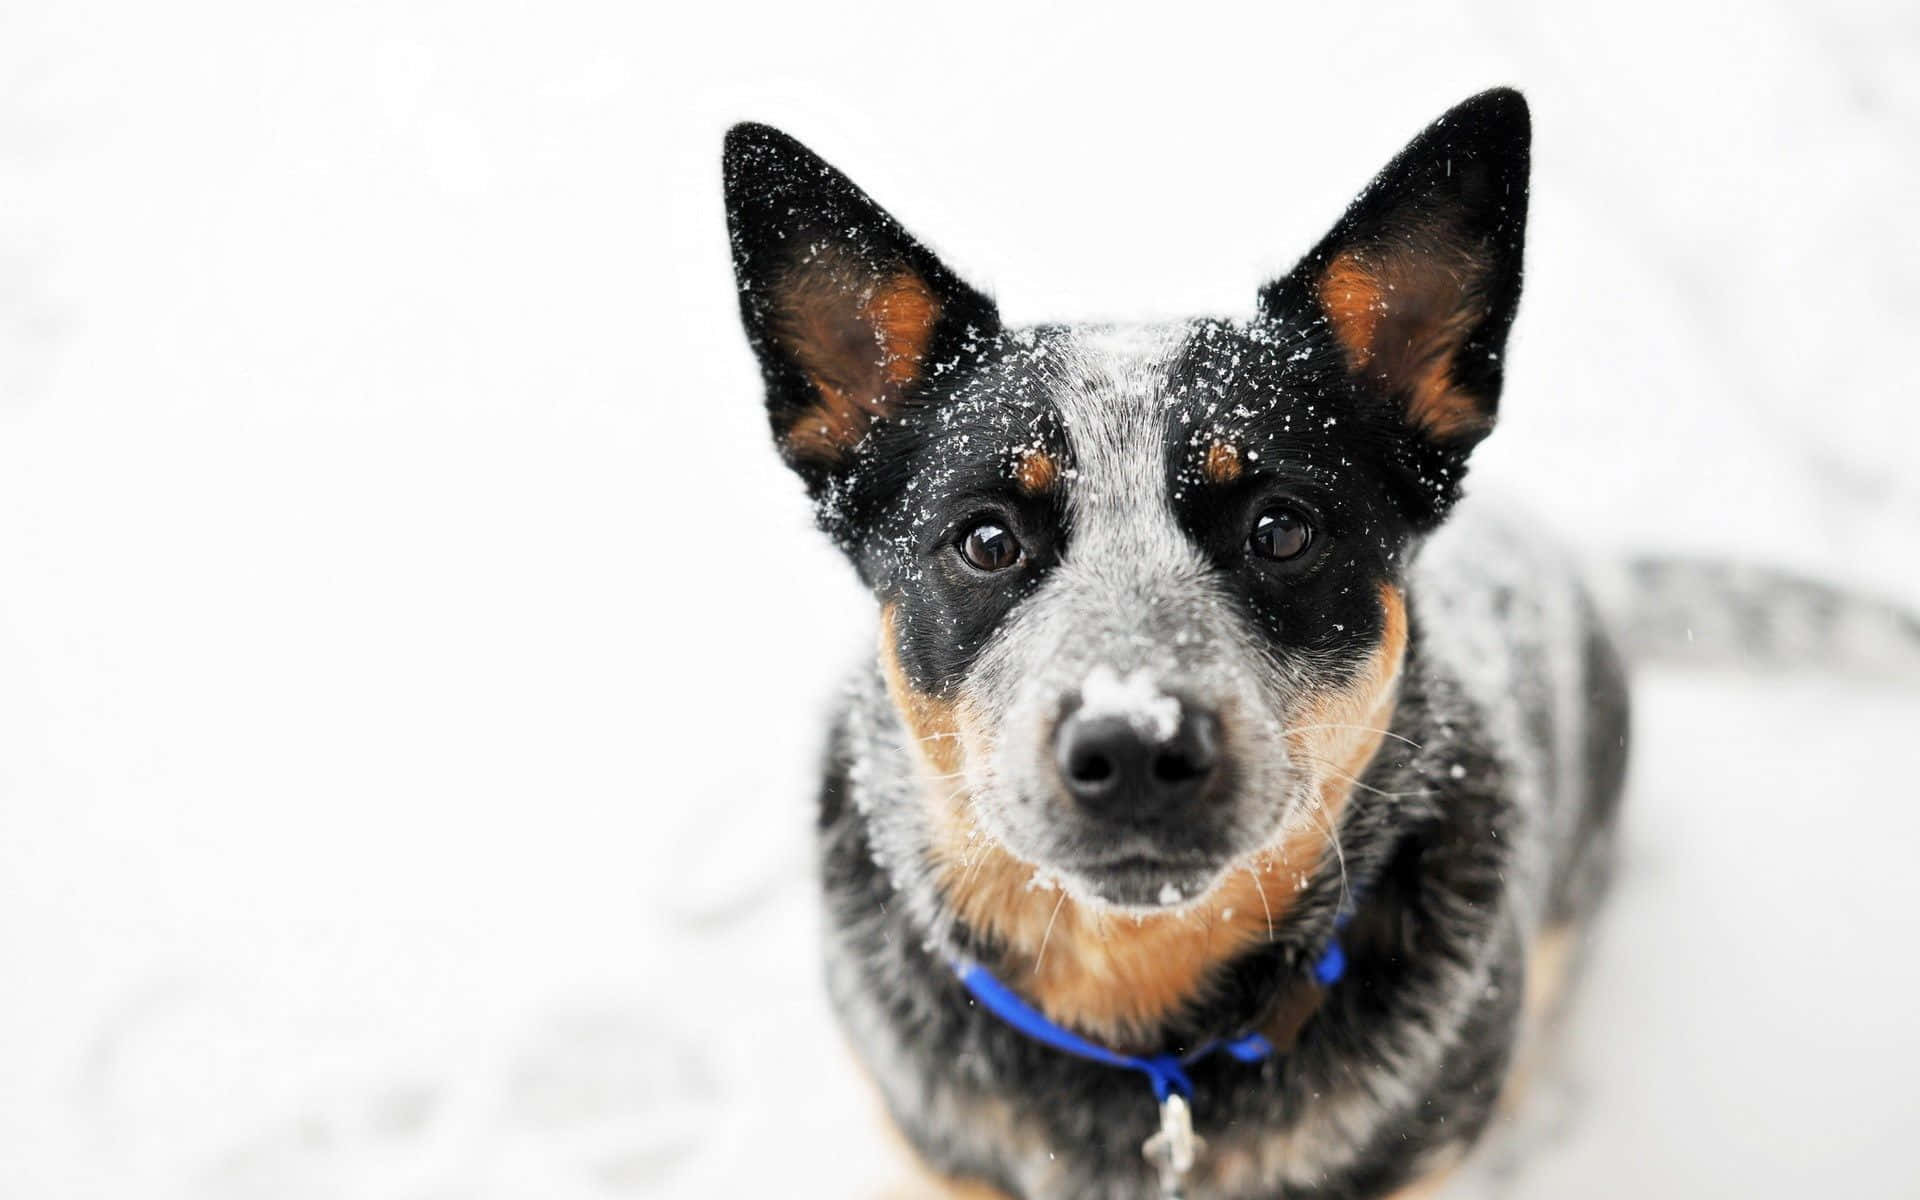 A Dog Is Sitting In The Snow Looking At The Camera